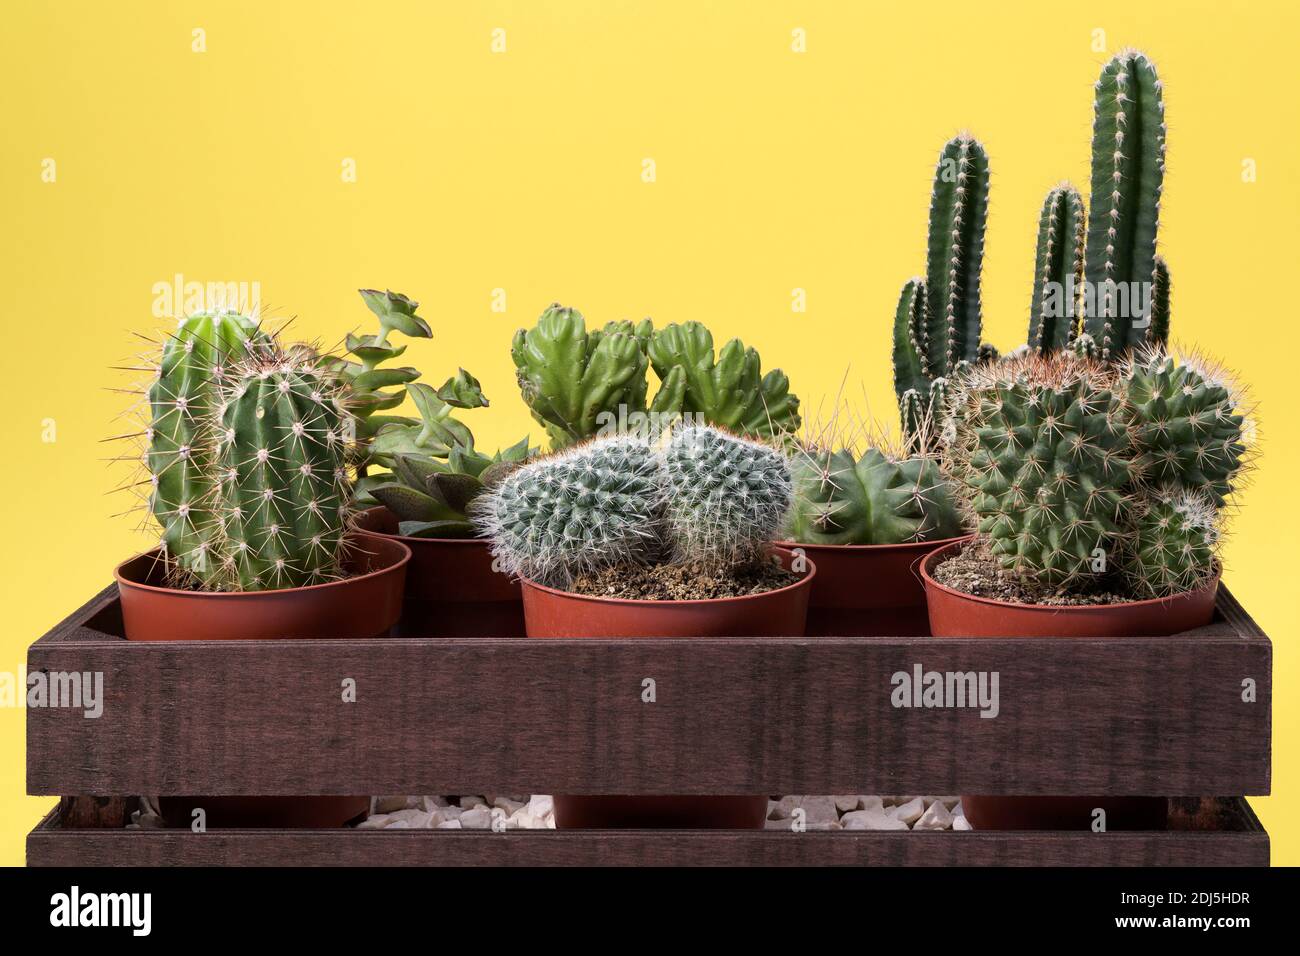 Cactus and succulents in a wooden box on a yellow background Stock Photo